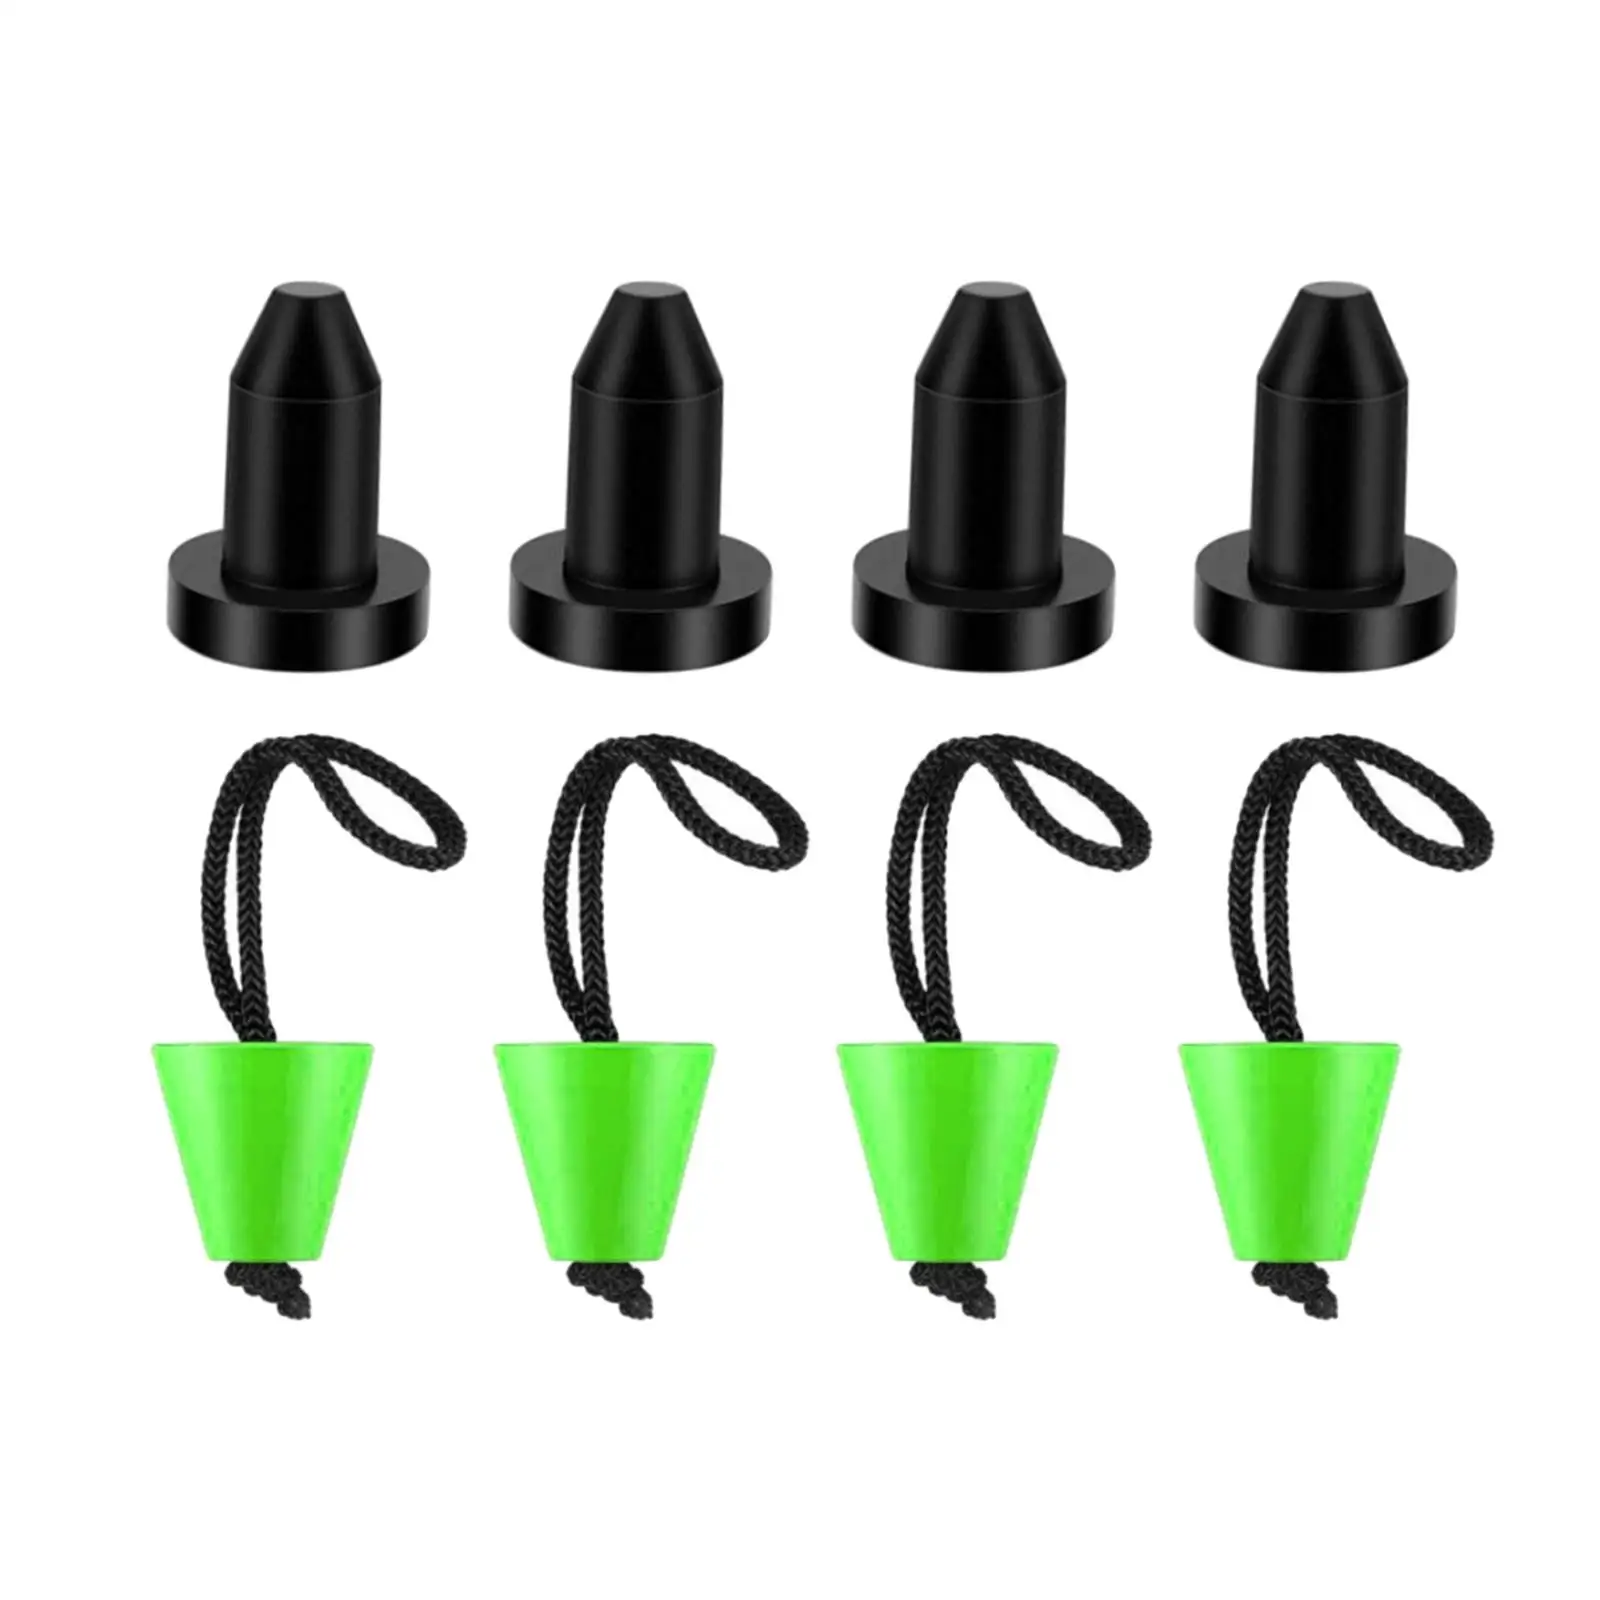 8x Kayak Scupper Plugs Replaces Part Accessories Supplies Kayak Drain Plug for Yacht Canoe Fishing Boats Kayak Water Sports